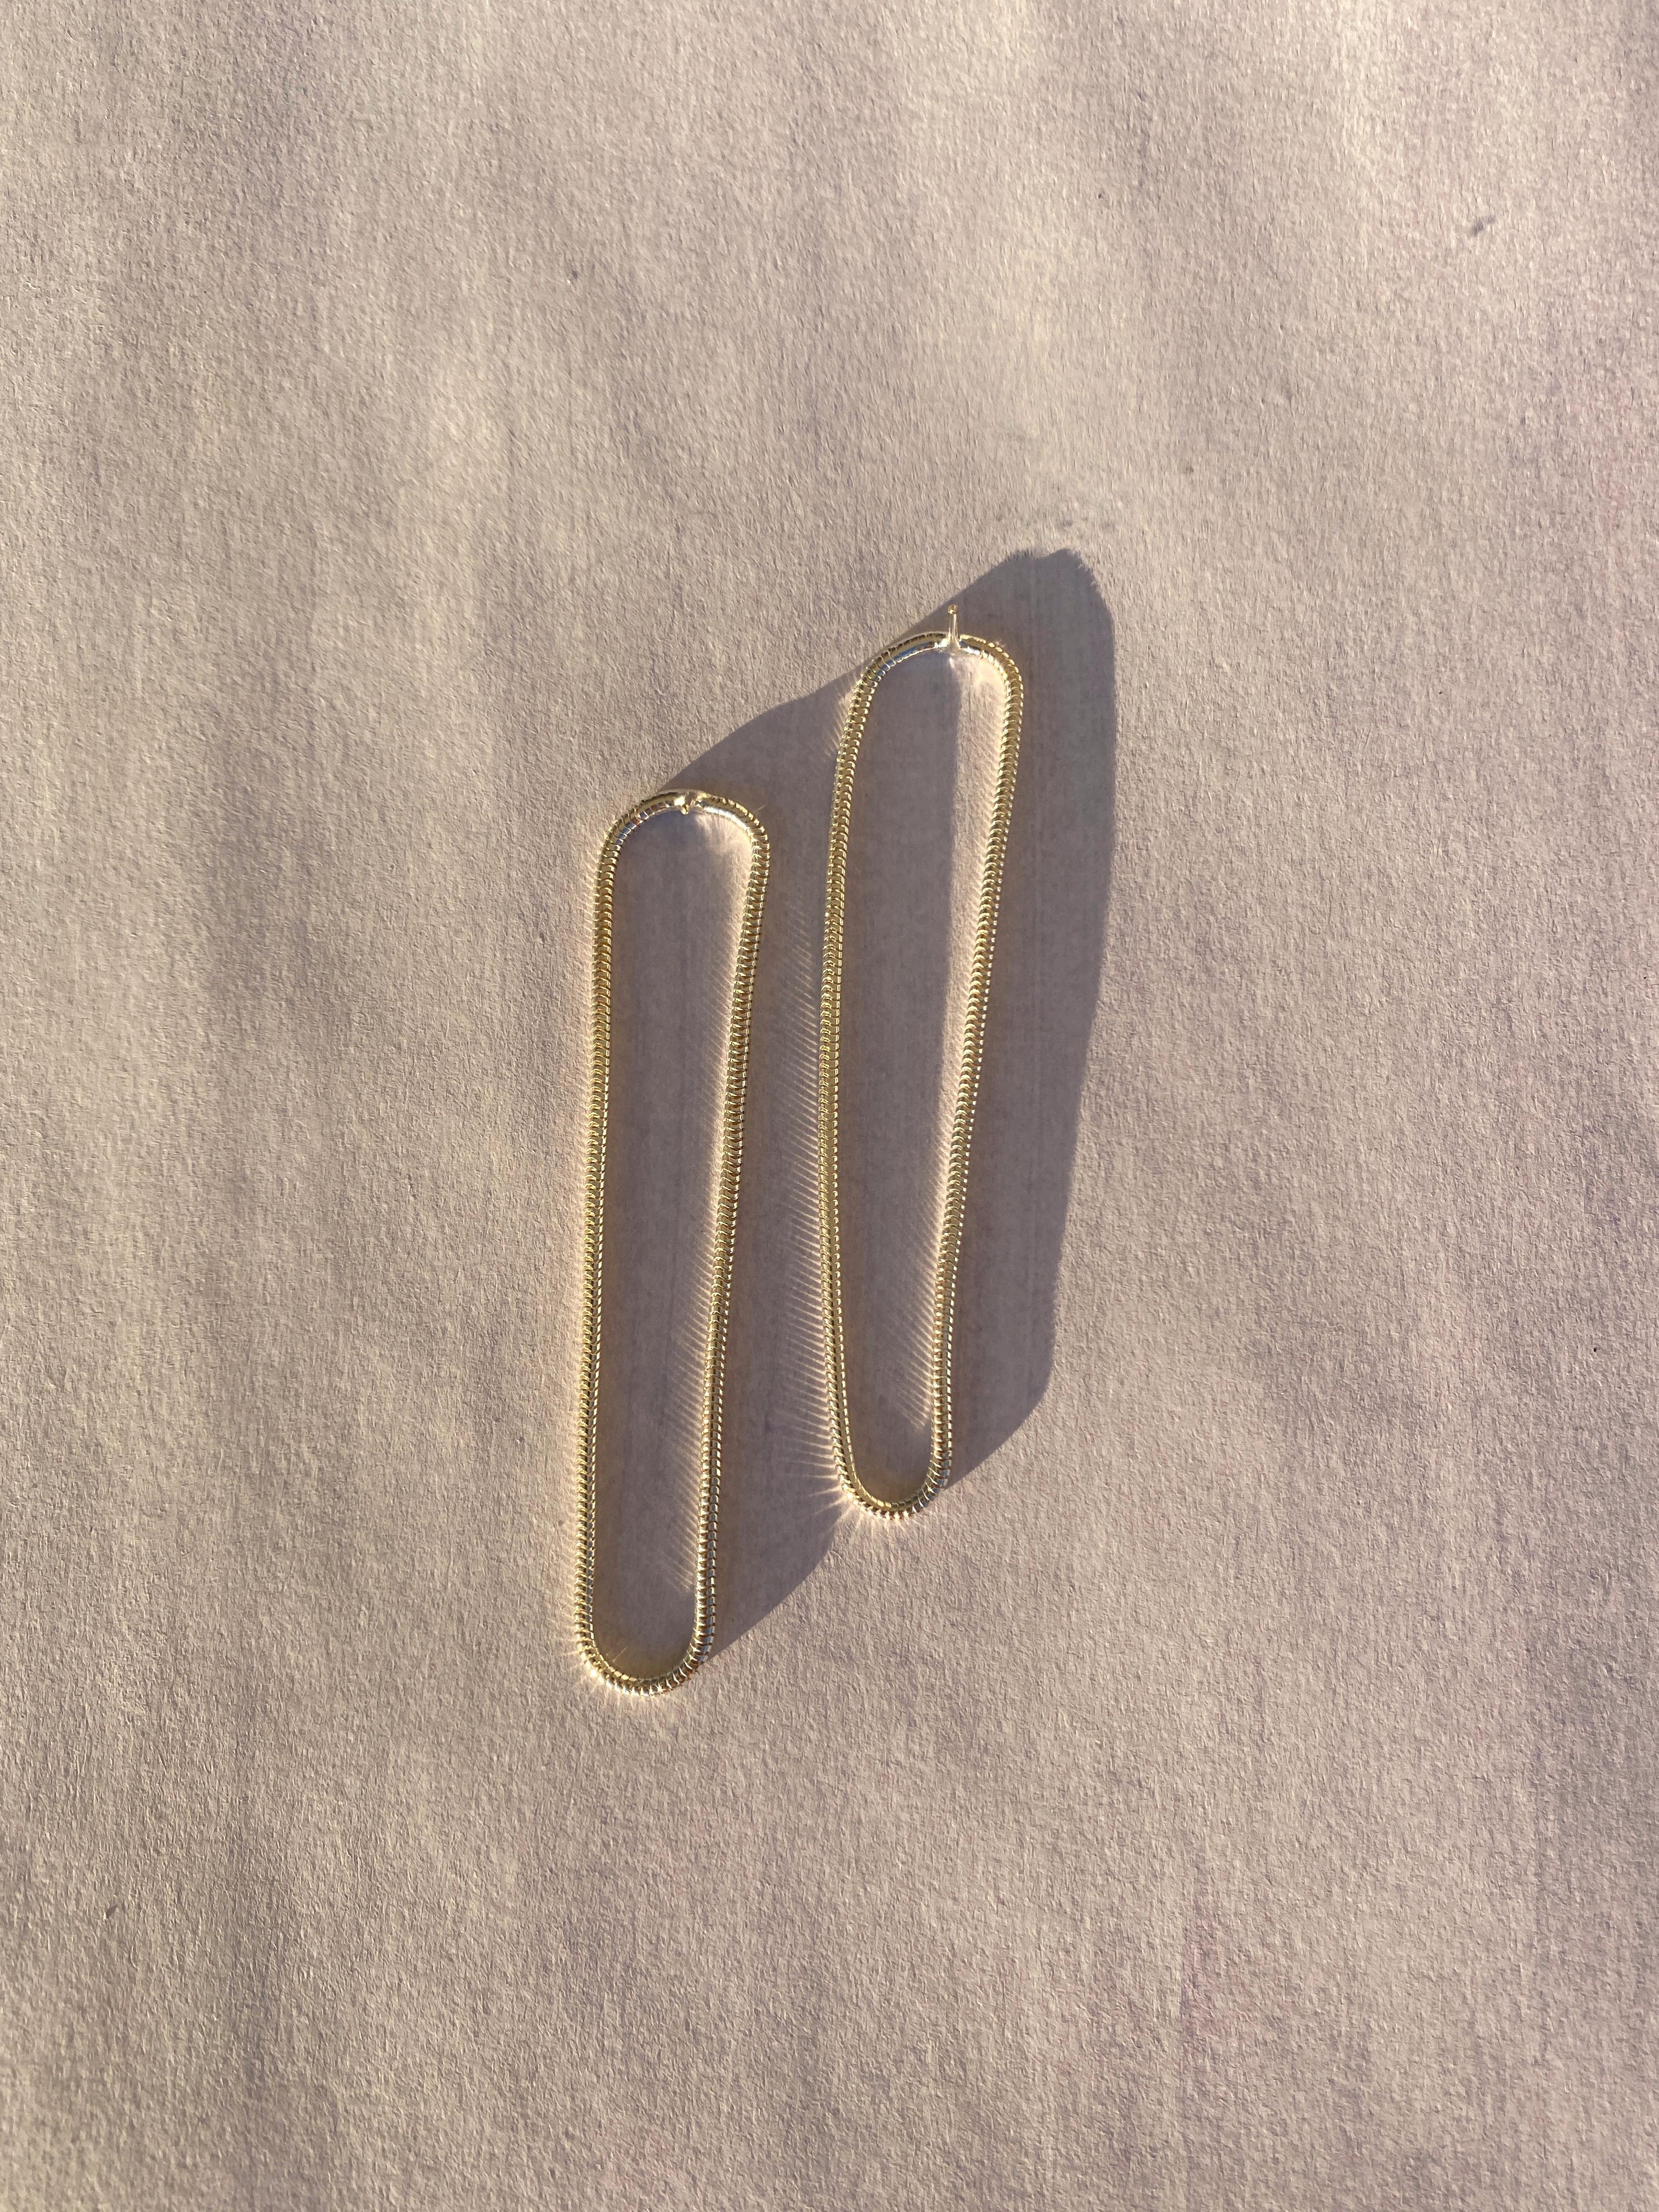 Halo slim yellow gold 

The halo slim earrings are made out of snake chain, a material that brings life to the earrings and creates a liquid effect when worn. 

All of our earrings have 10 K posts to avoid allergies and handmade backings in the